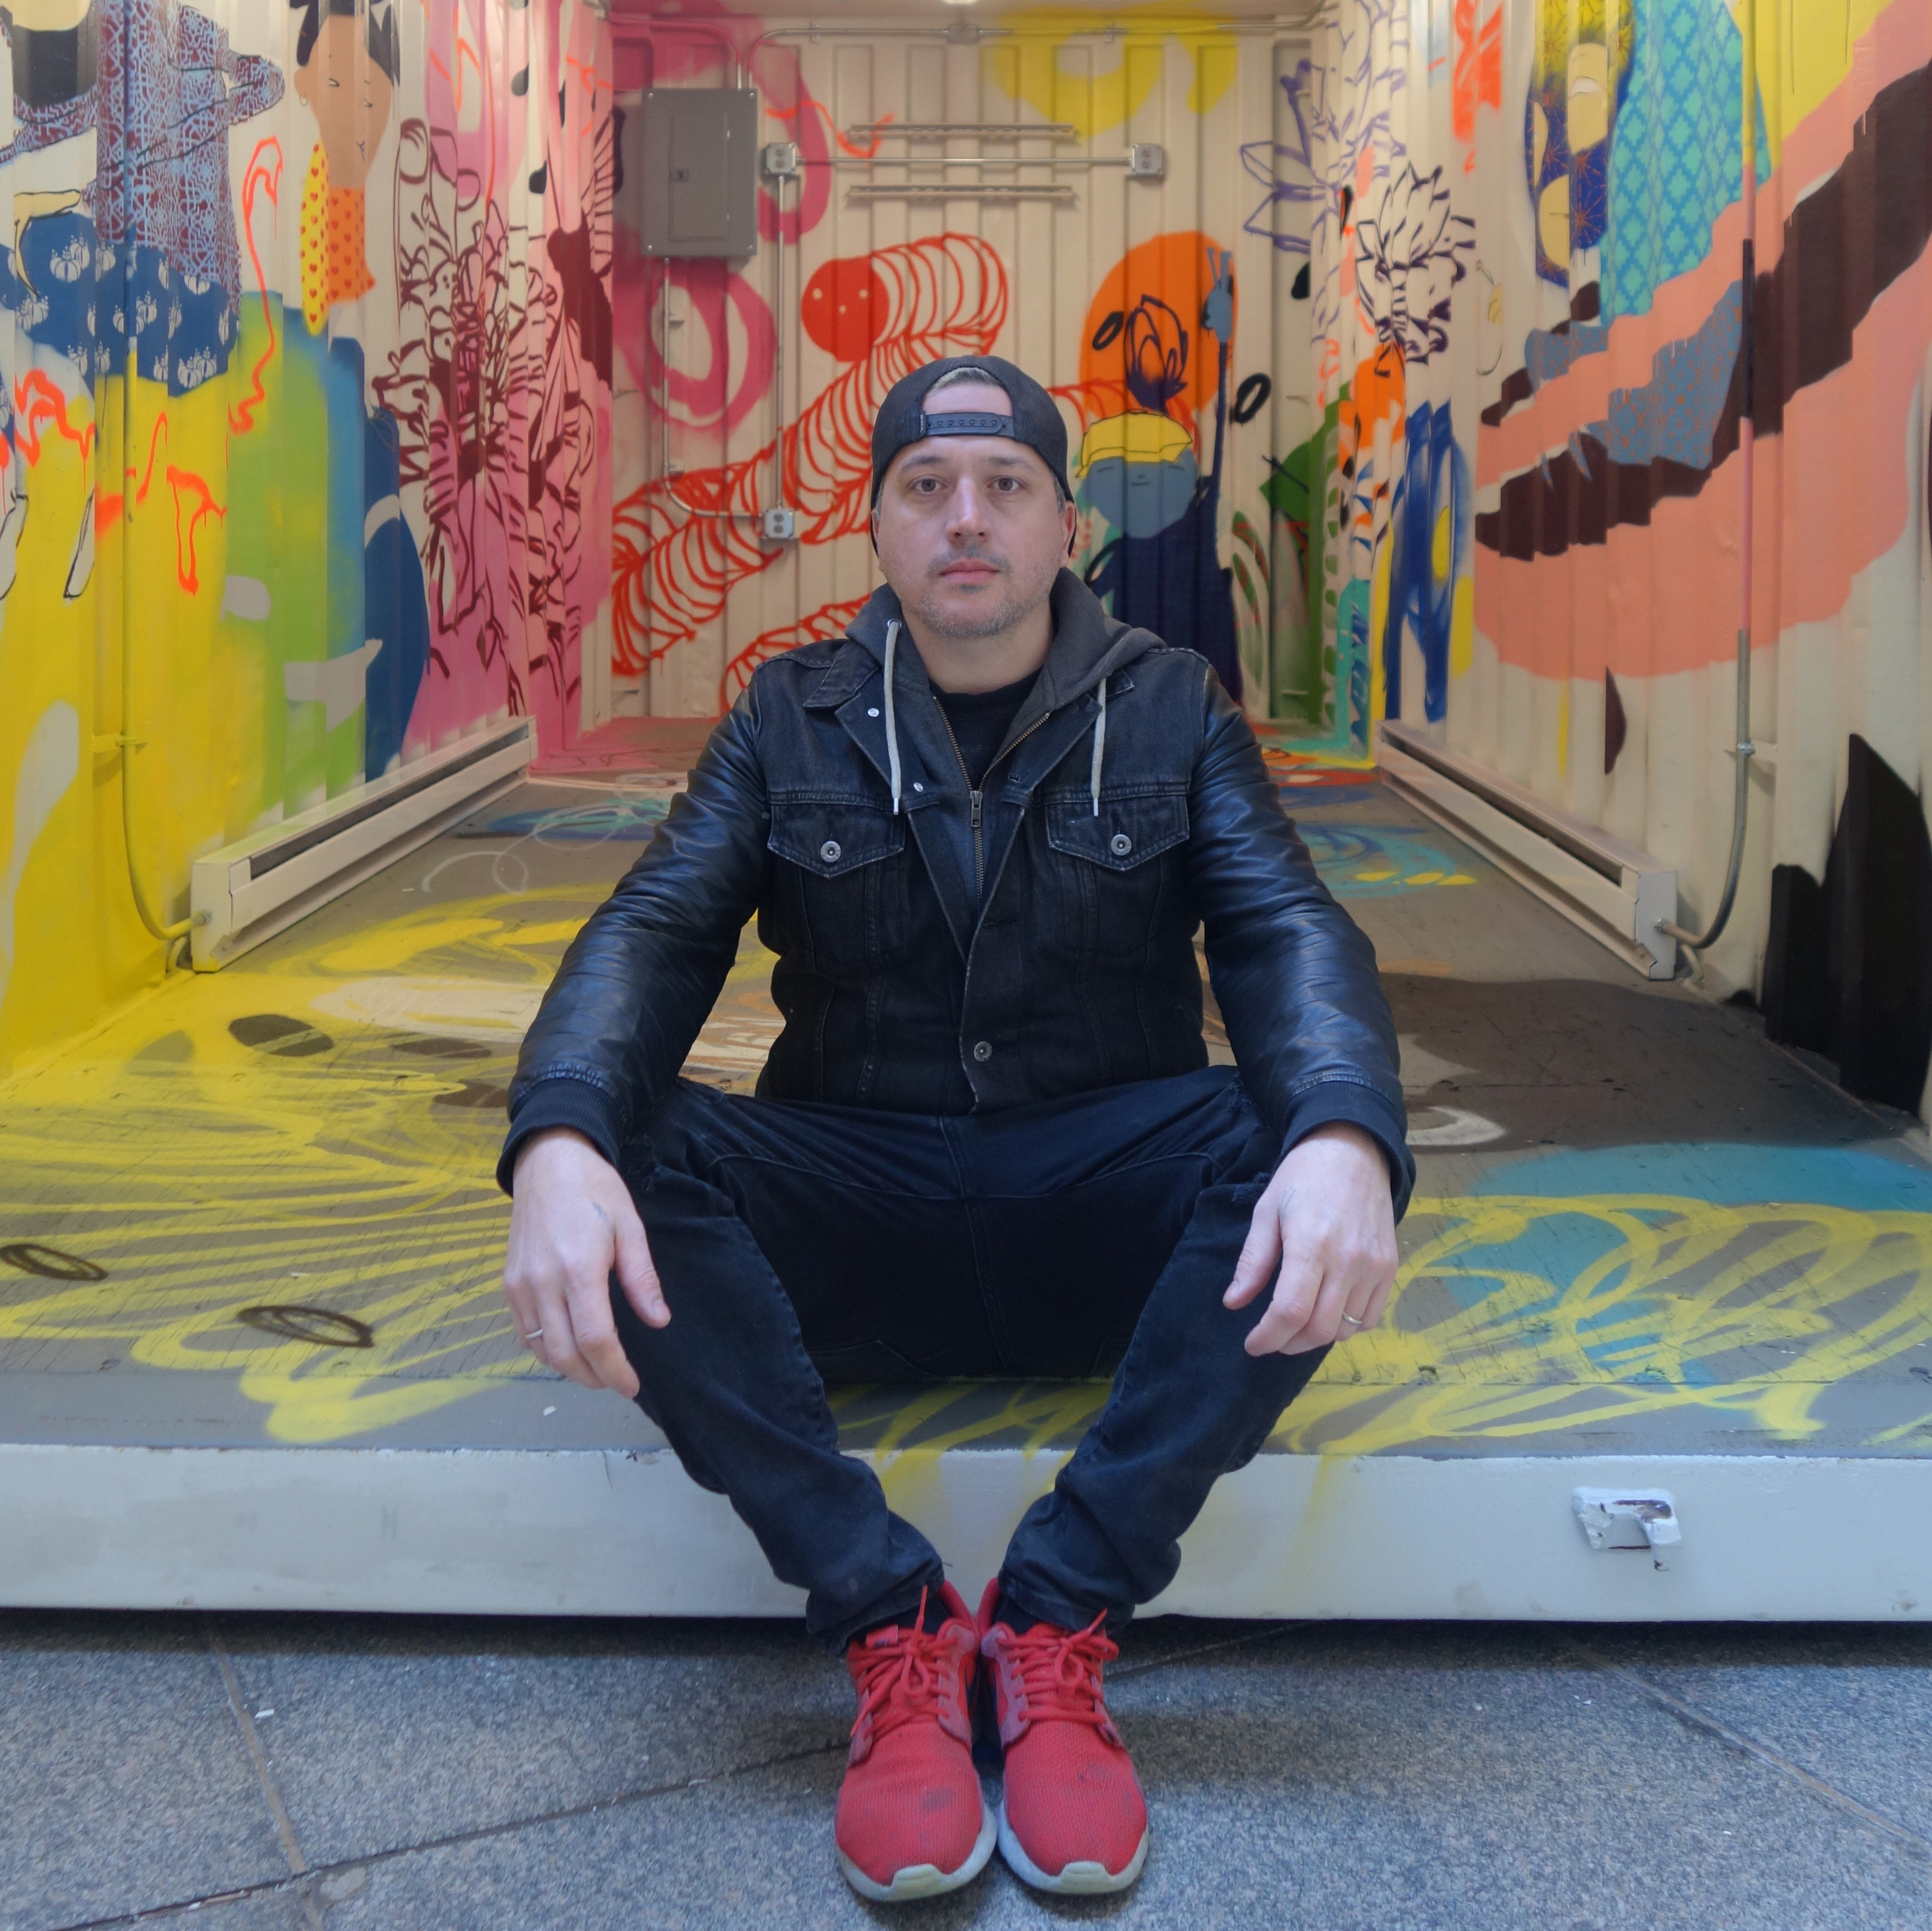 Photo of Kelly Towles sitting on the ground with colorful murals behind him